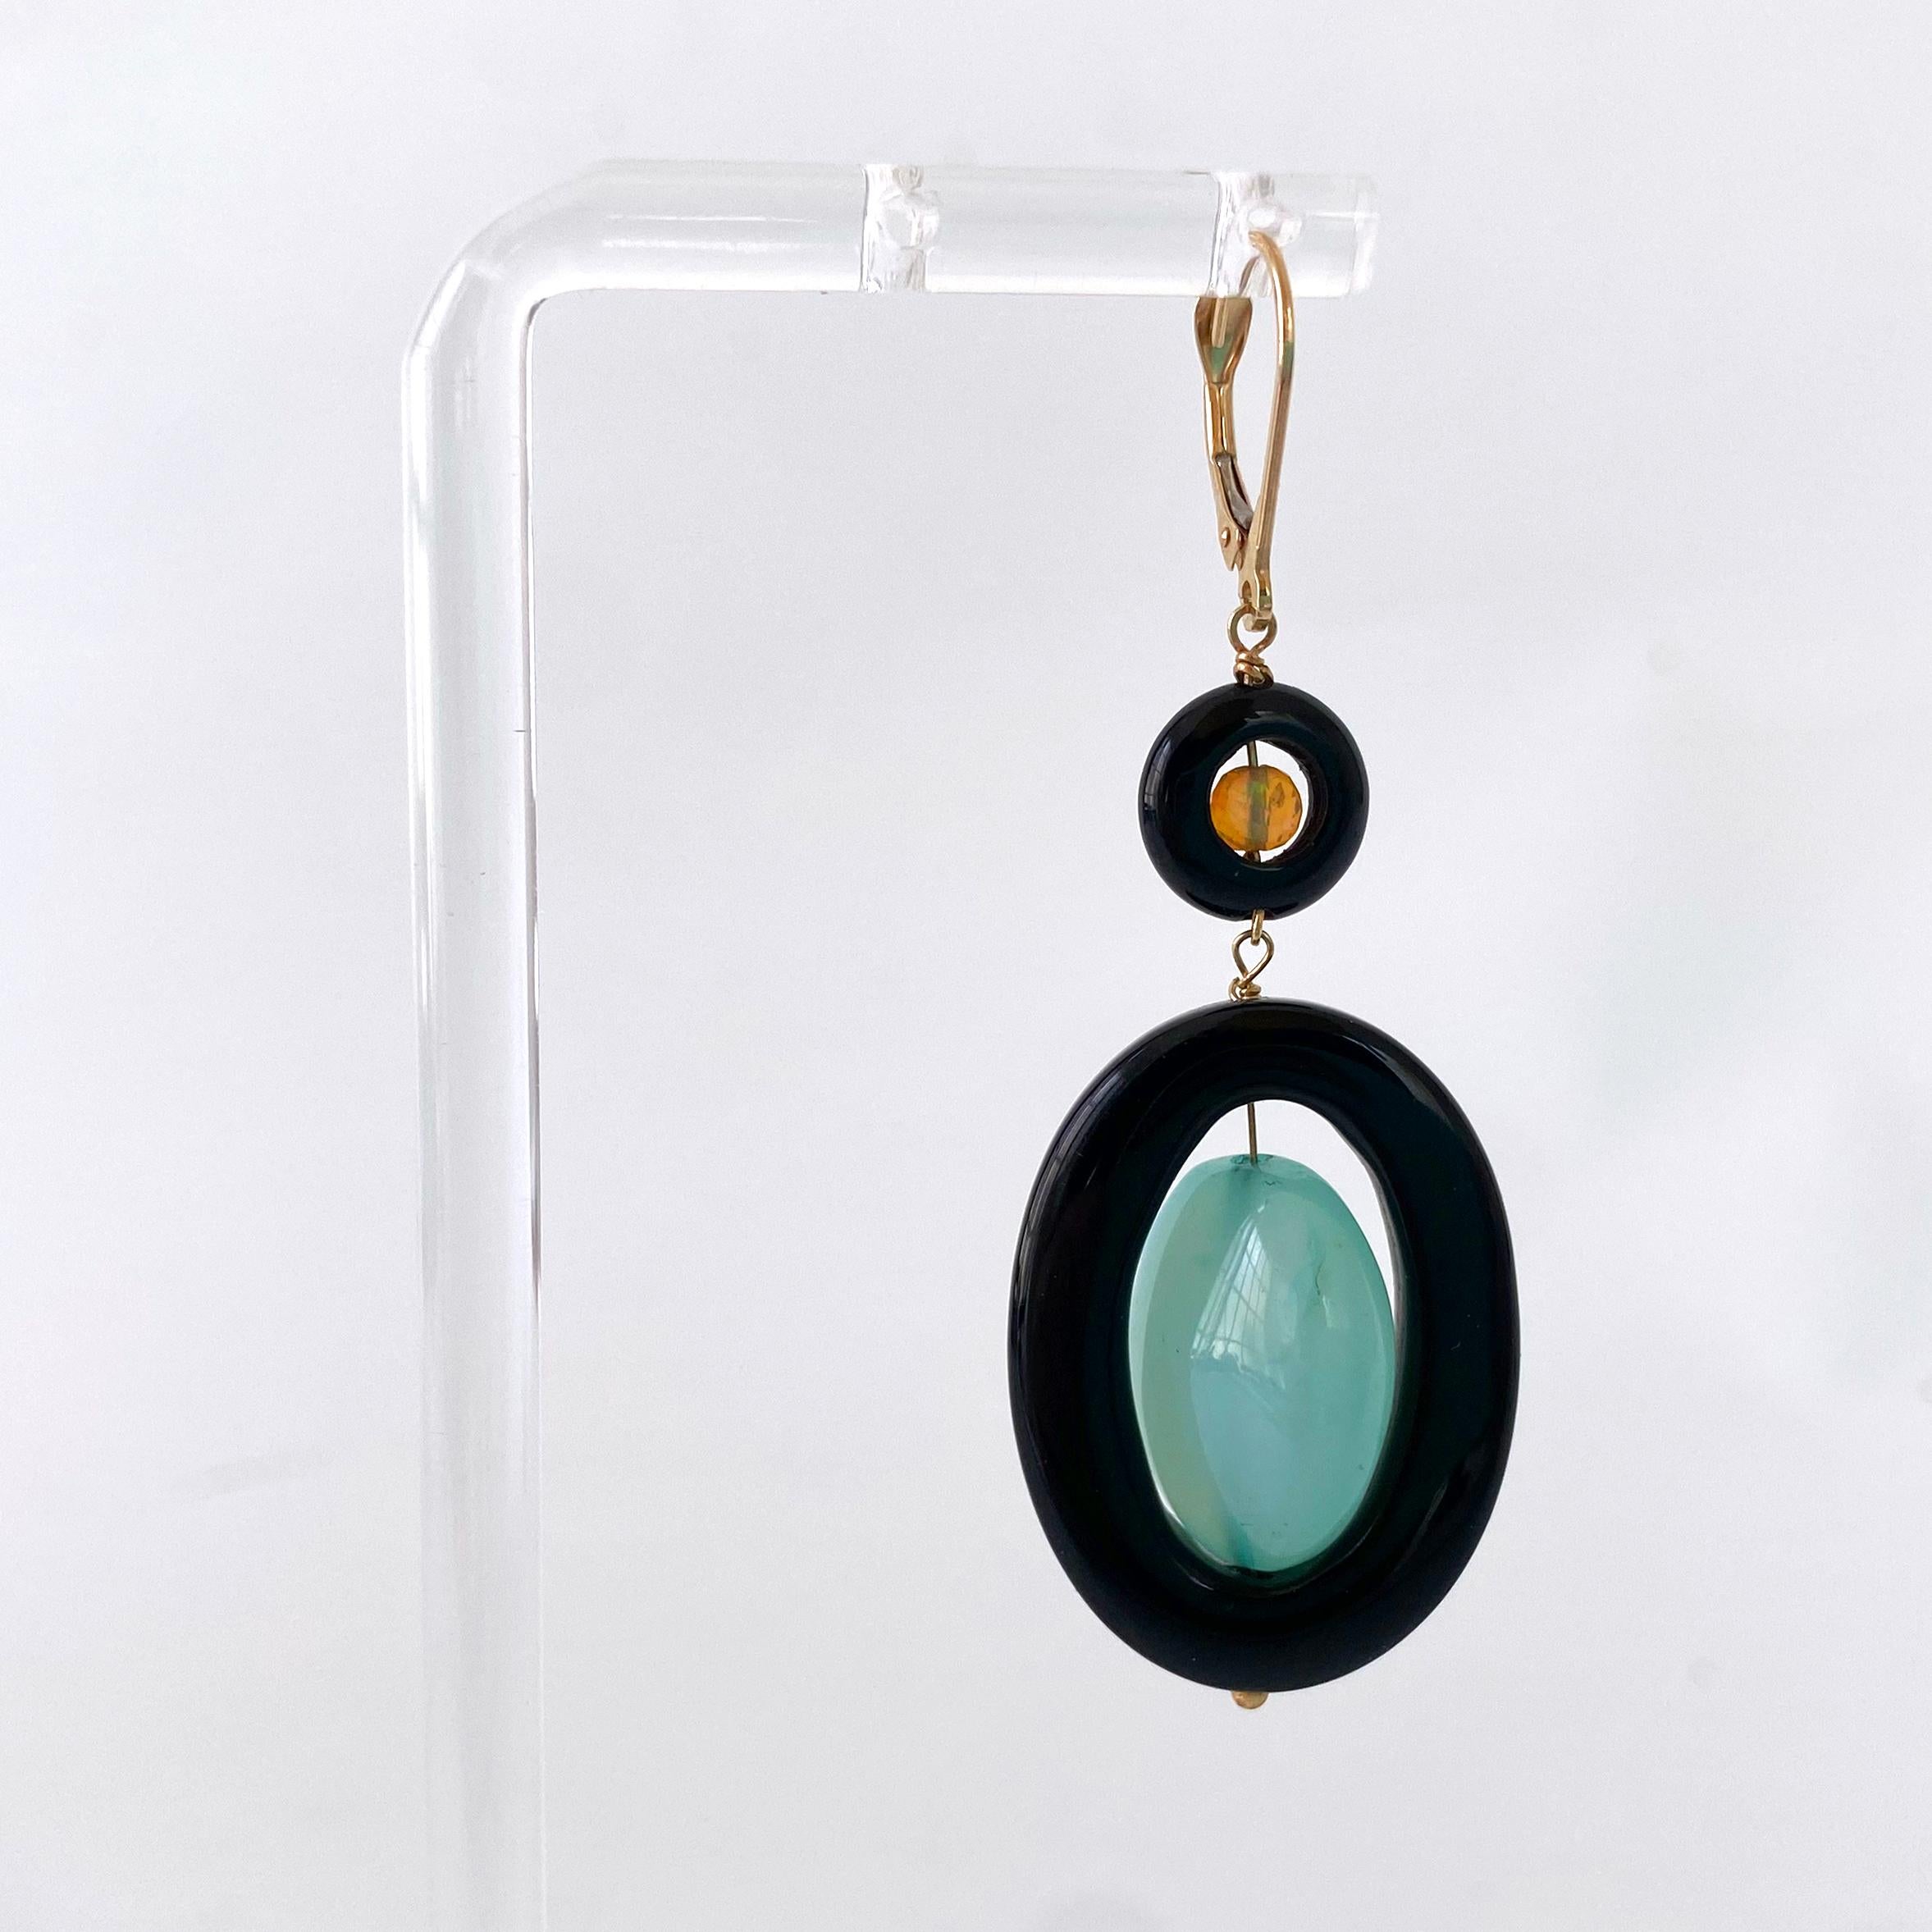 Marina J. Black Onyx, Fire Opal & Chalcedony Earrings with solid 14k Lever Backs In New Condition For Sale In Los Angeles, CA